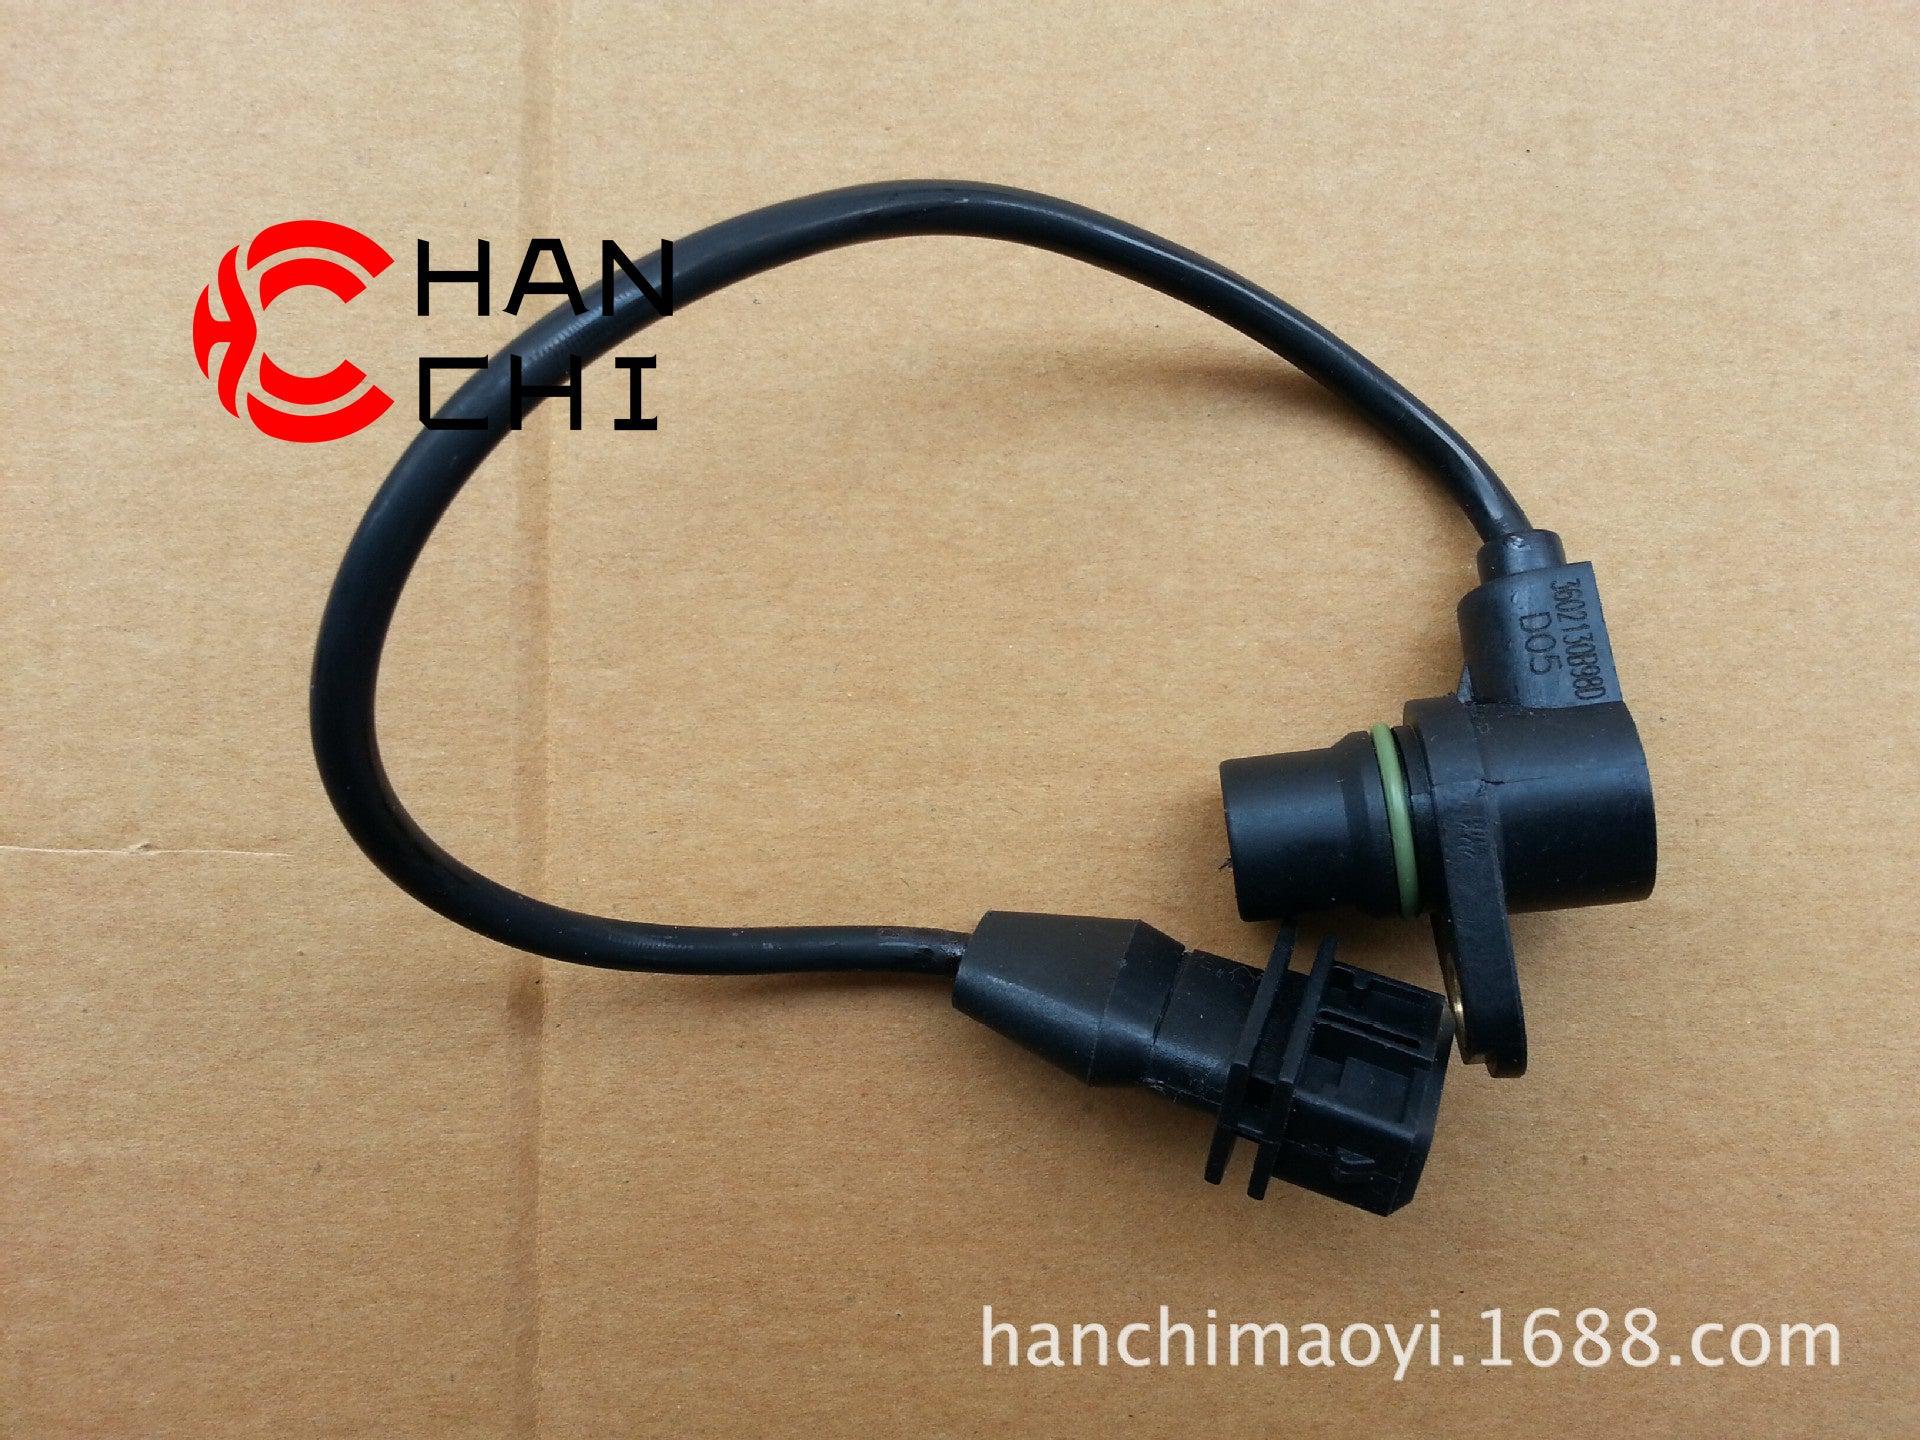 【Description】---☀Welcome to HANCHI☀---✔Good Quality✔Generally Applicability✔Competitive PriceEnjoy your shopping time↖（^ω^）↗【Features】Brand-New with High Quality for the Aftermarket.Totally mathced your need.**Stable Quality**High Precision**Easy Installation**【Specification】OEM：3602130B98D 3602130-1844 D04194021Material：ABSColor：blackOrigin：Made in ChinaWeight：100g【Packing List】1* Camshaft Position Sensor 【More Service】 We can provide OEM service We can Be your one-step solution for Auto Parts 